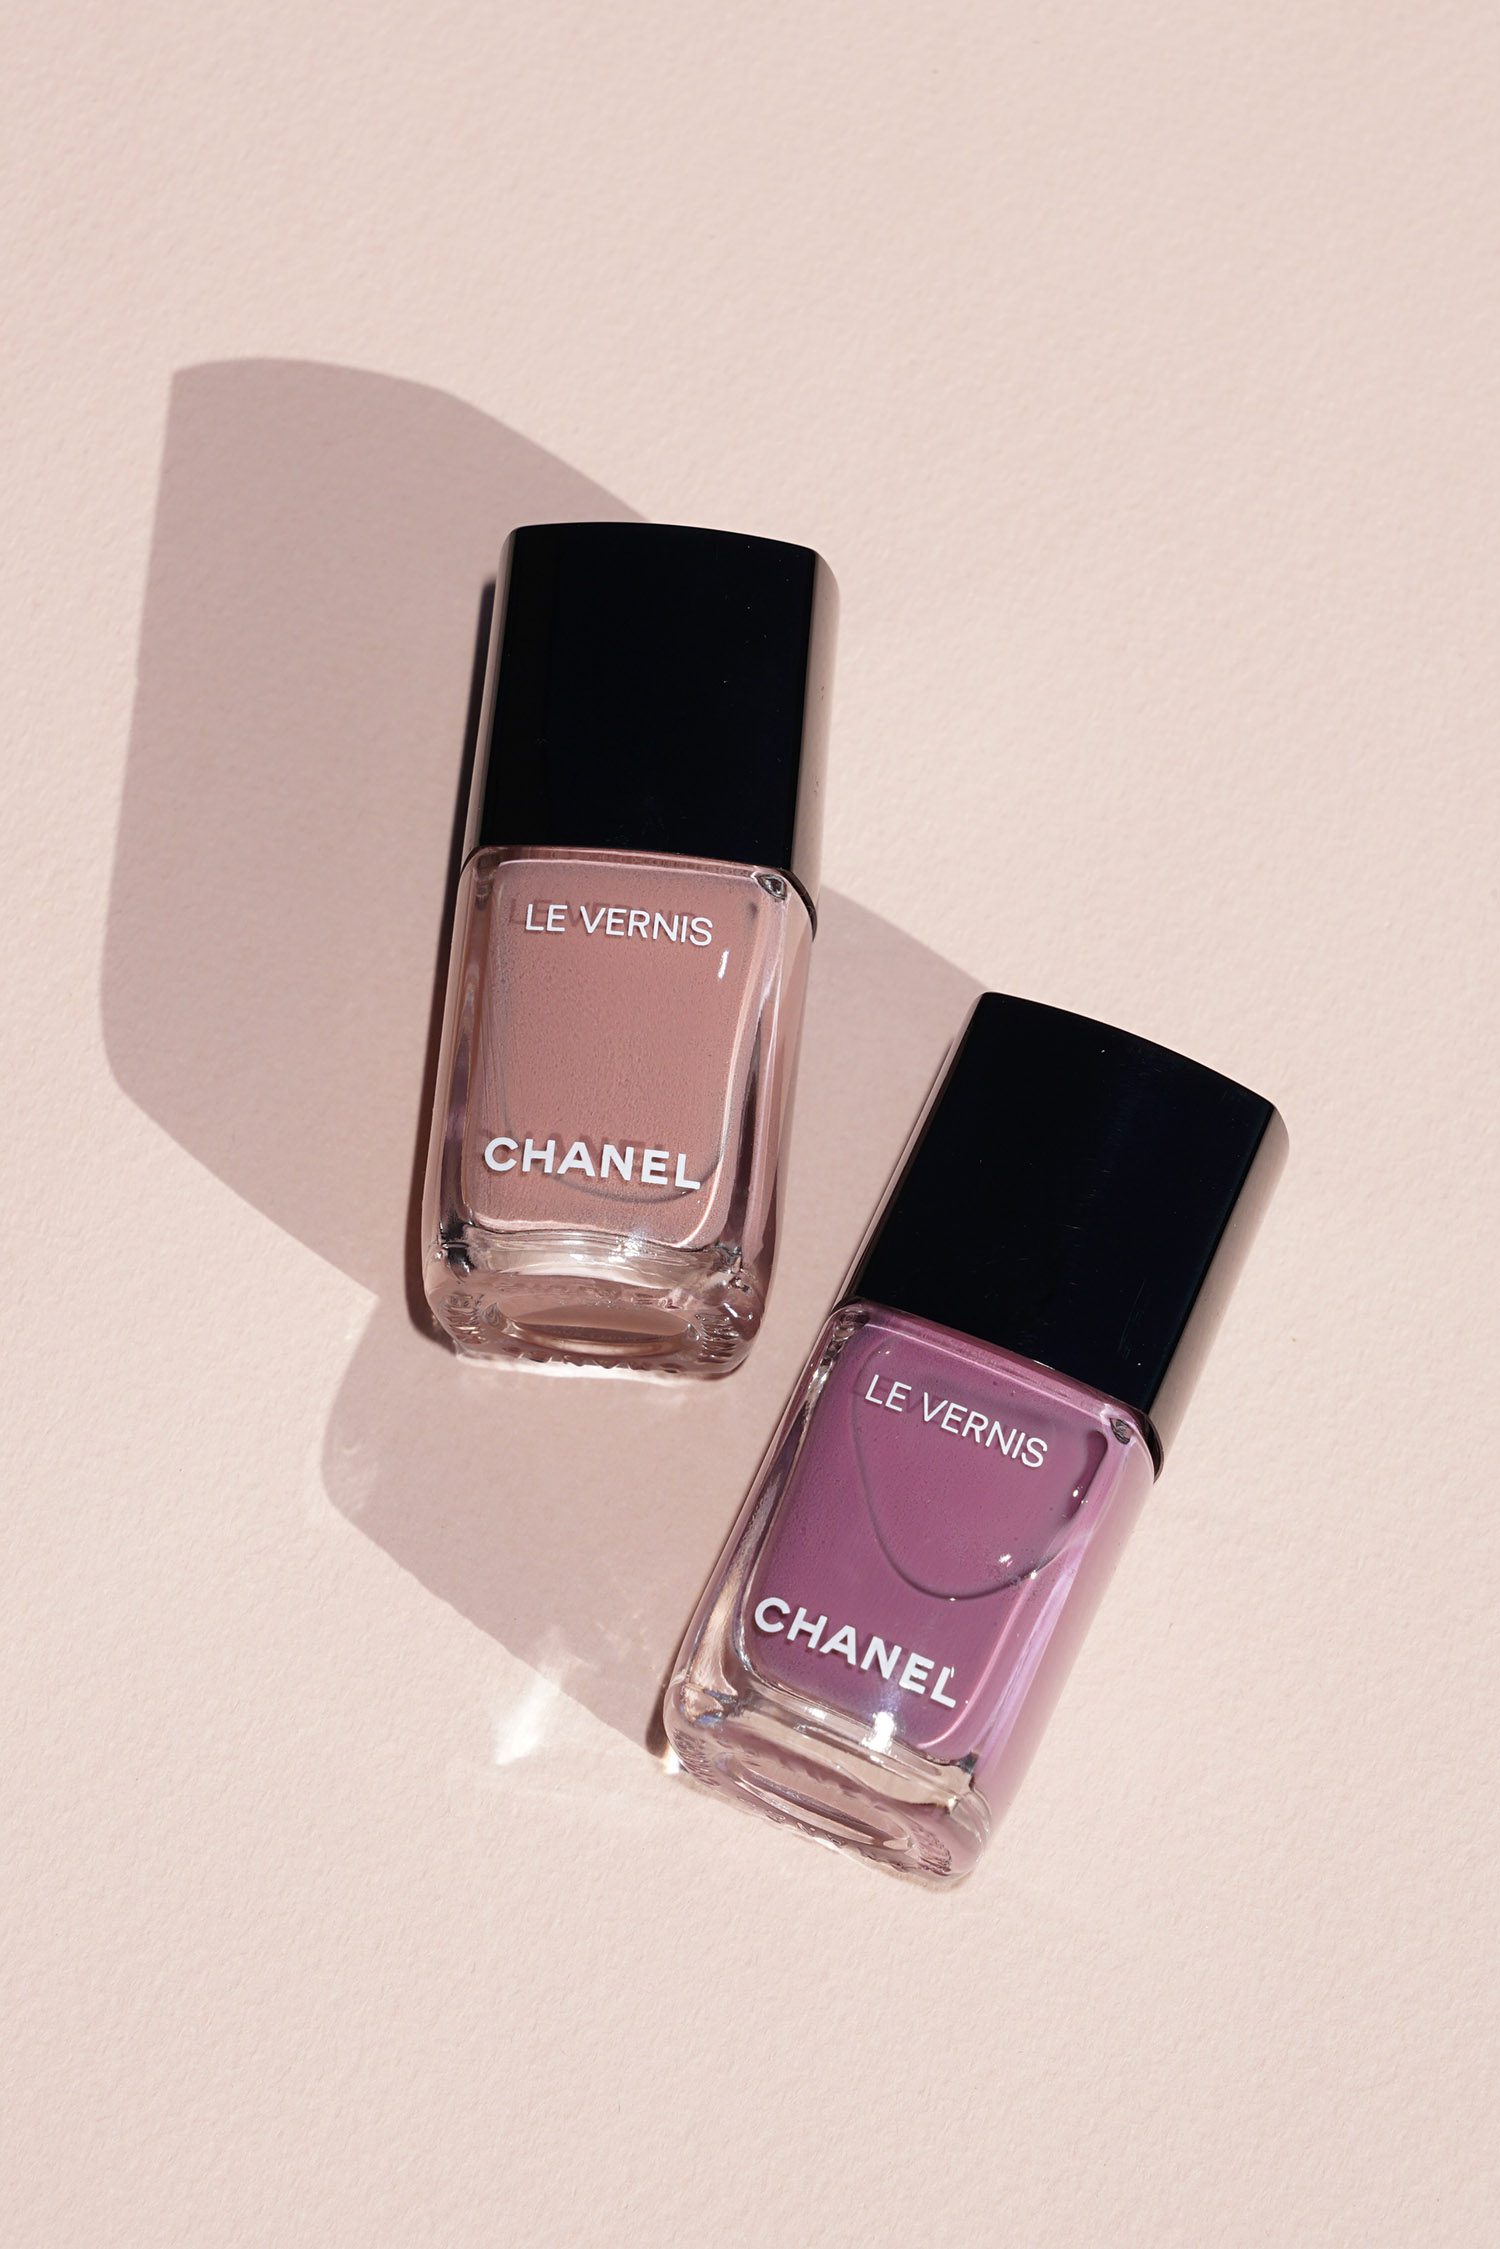 The Chanel Desert Dream collection boasts rich, wearable hues